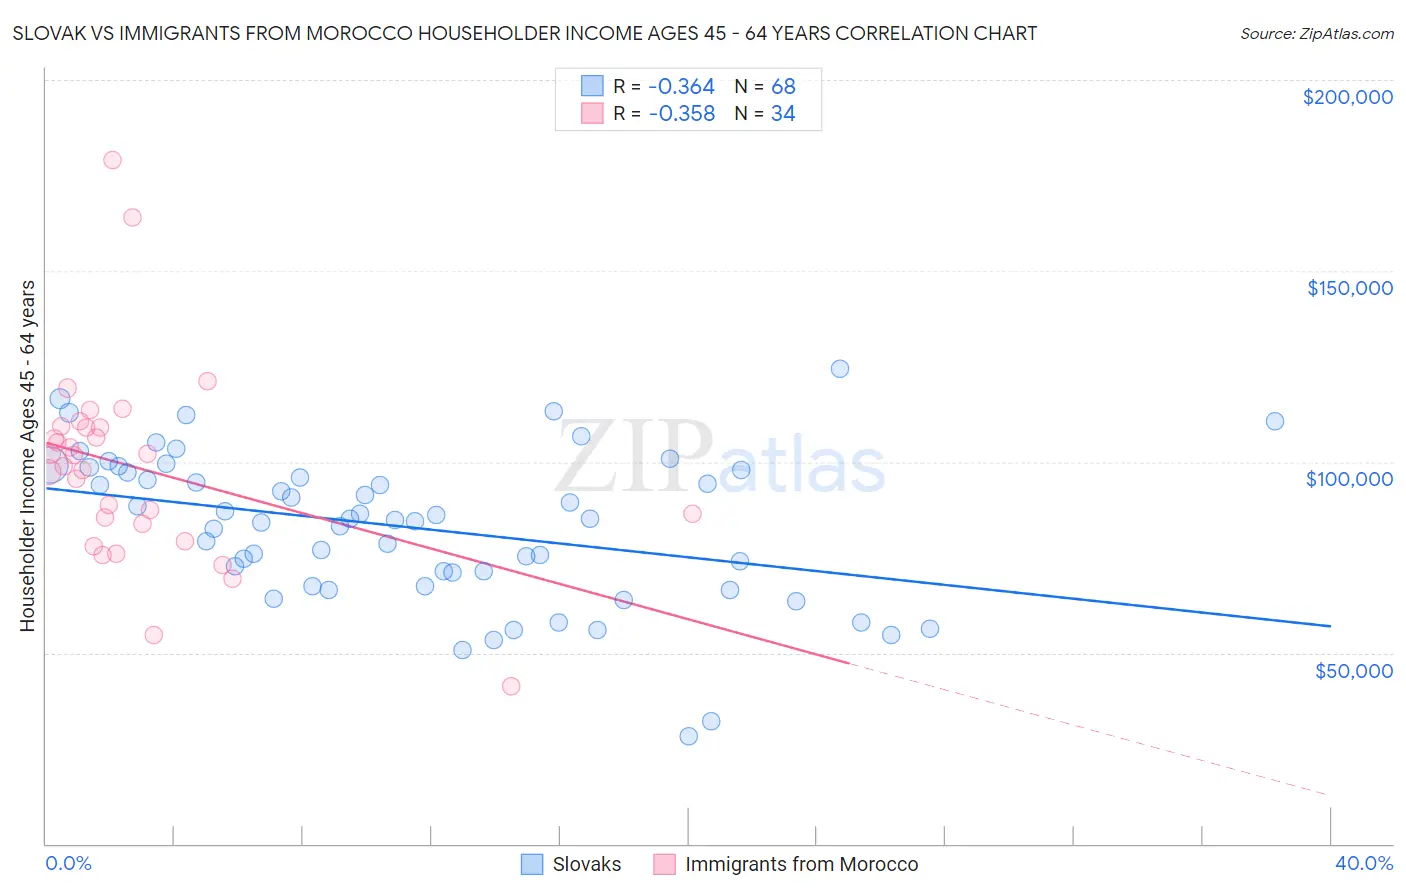 Slovak vs Immigrants from Morocco Householder Income Ages 45 - 64 years